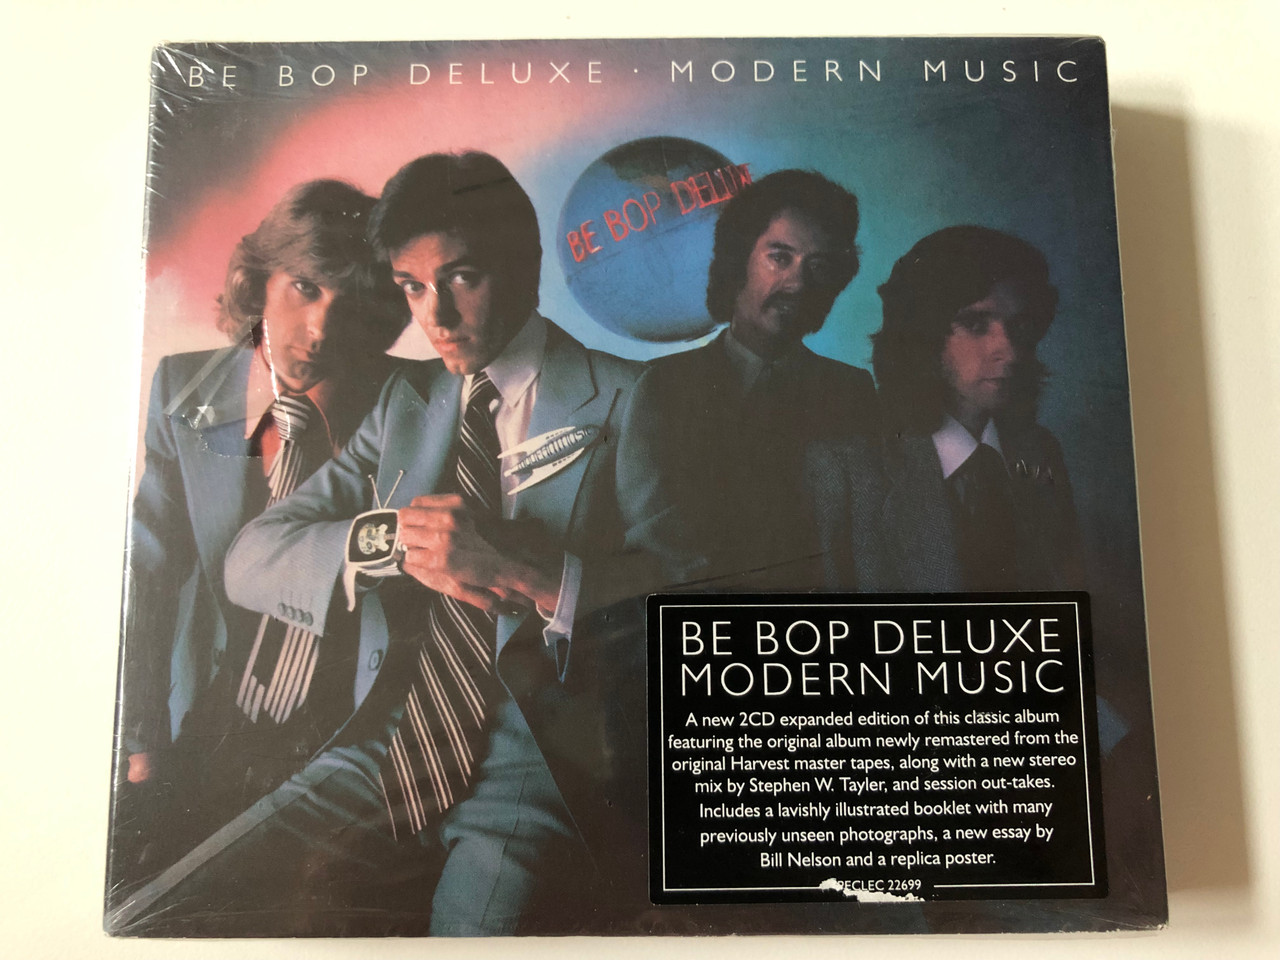 https://cdn10.bigcommerce.com/s-62bdpkt7pb/products/0/images/257765/Be_Bop_Deluxe_Modern_Music_A_new_CD_expanded_edition_of_this_classic_album_featuring_the_original_album_newly_remastered_from_the_original_Harvest_master_tapes_Esoteric_Recordings_2x_Audio_1__83265.1667551301.1280.1280.JPG?c=2&_gl=1*1aw9edo*_ga*MjA2NTIxMjE2MC4xNTkwNTEyNTMy*_ga_WS2VZYPC6G*MTY2NzU0NTYyOS42MTcuMS4xNjY3NTUxMjkzLjYwLjAuMA..